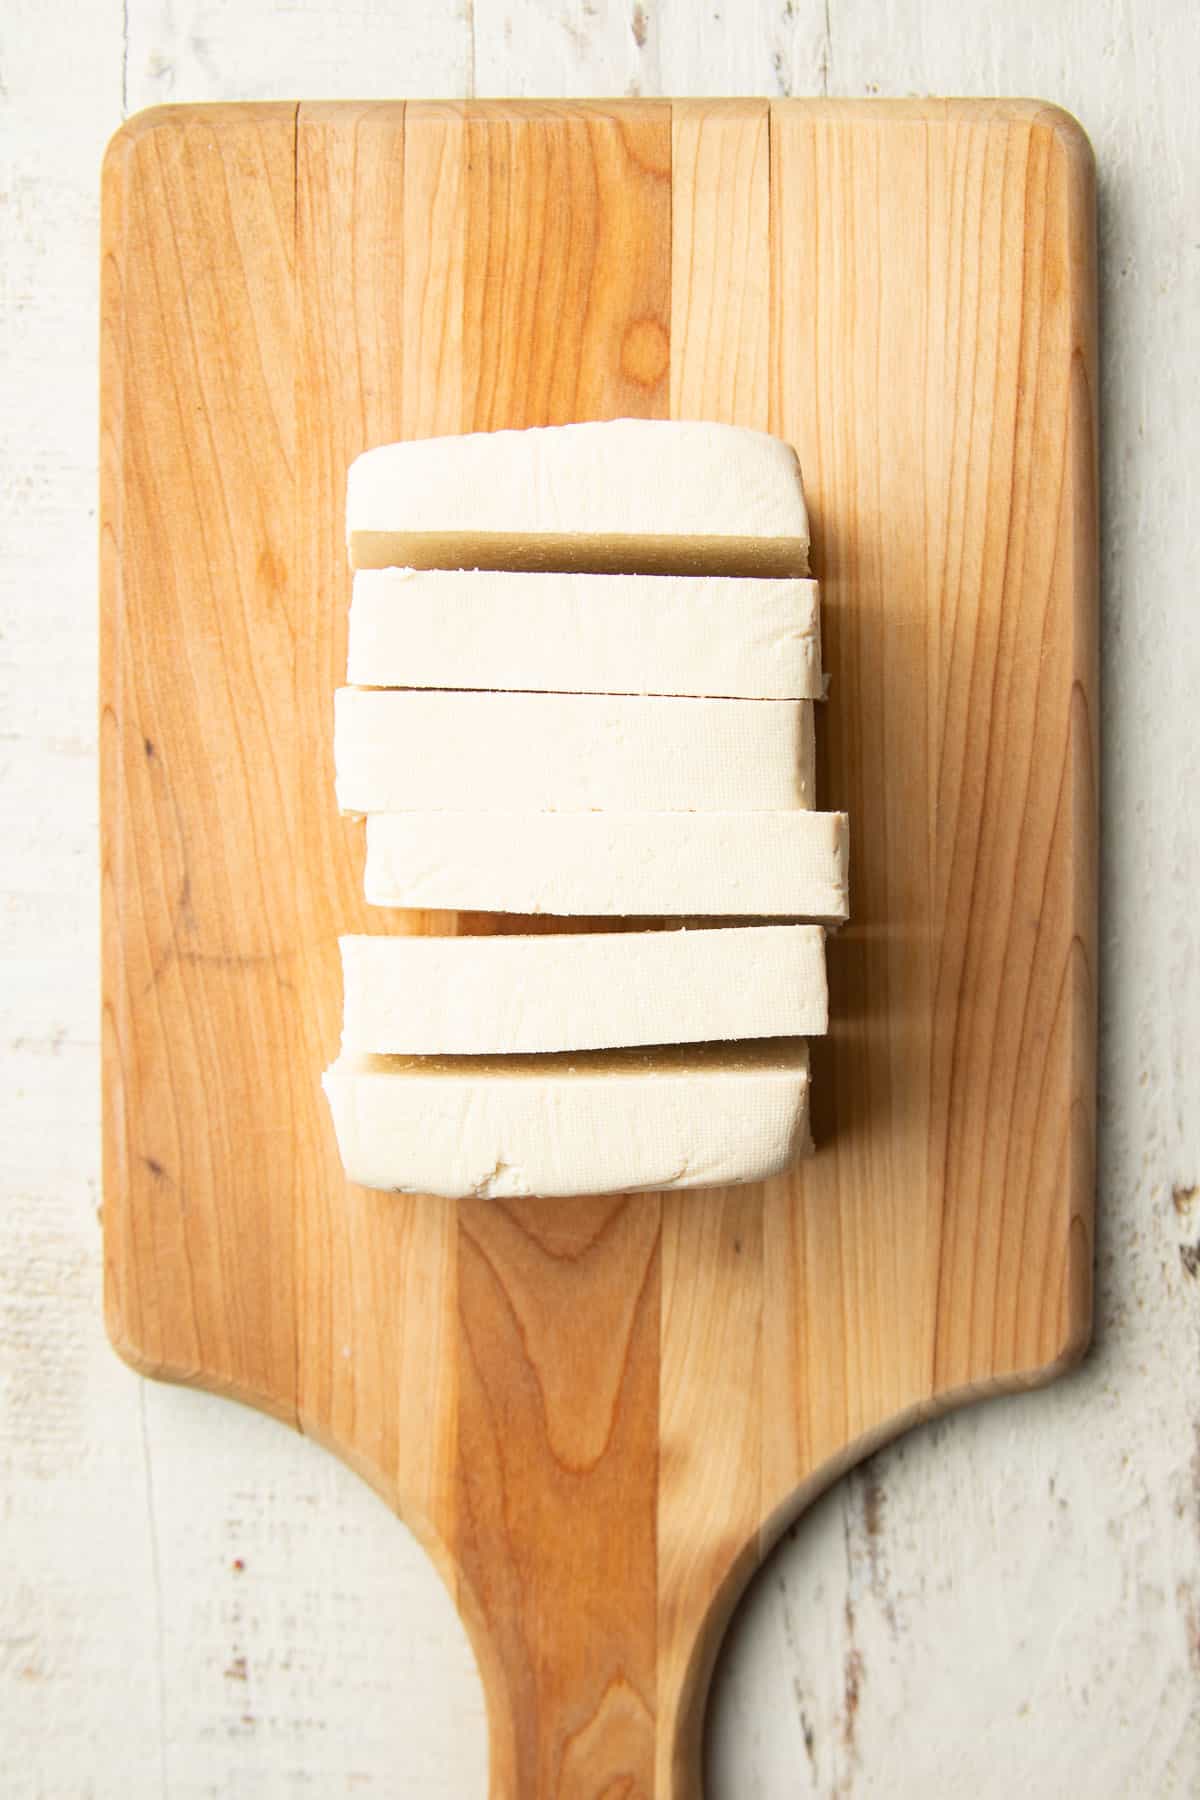 Sliced block of tofu on a wooden cutting board.